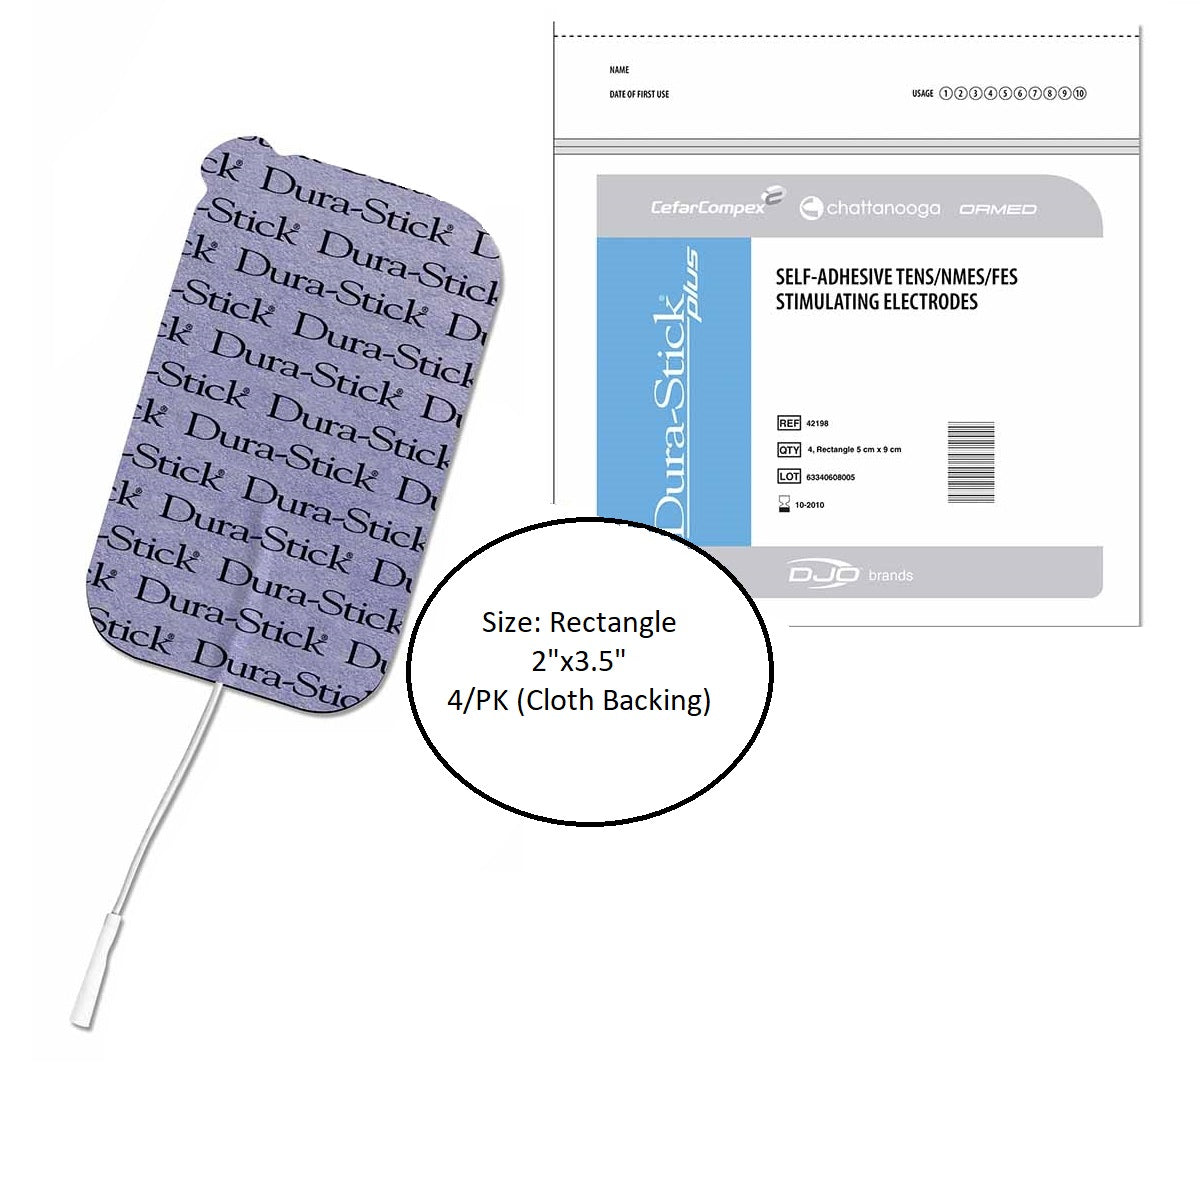 Chattanooga Dura-Stick Plus Self Adhesive Electrodes, 2" x 3.5" Rectangle - physio supplies canada